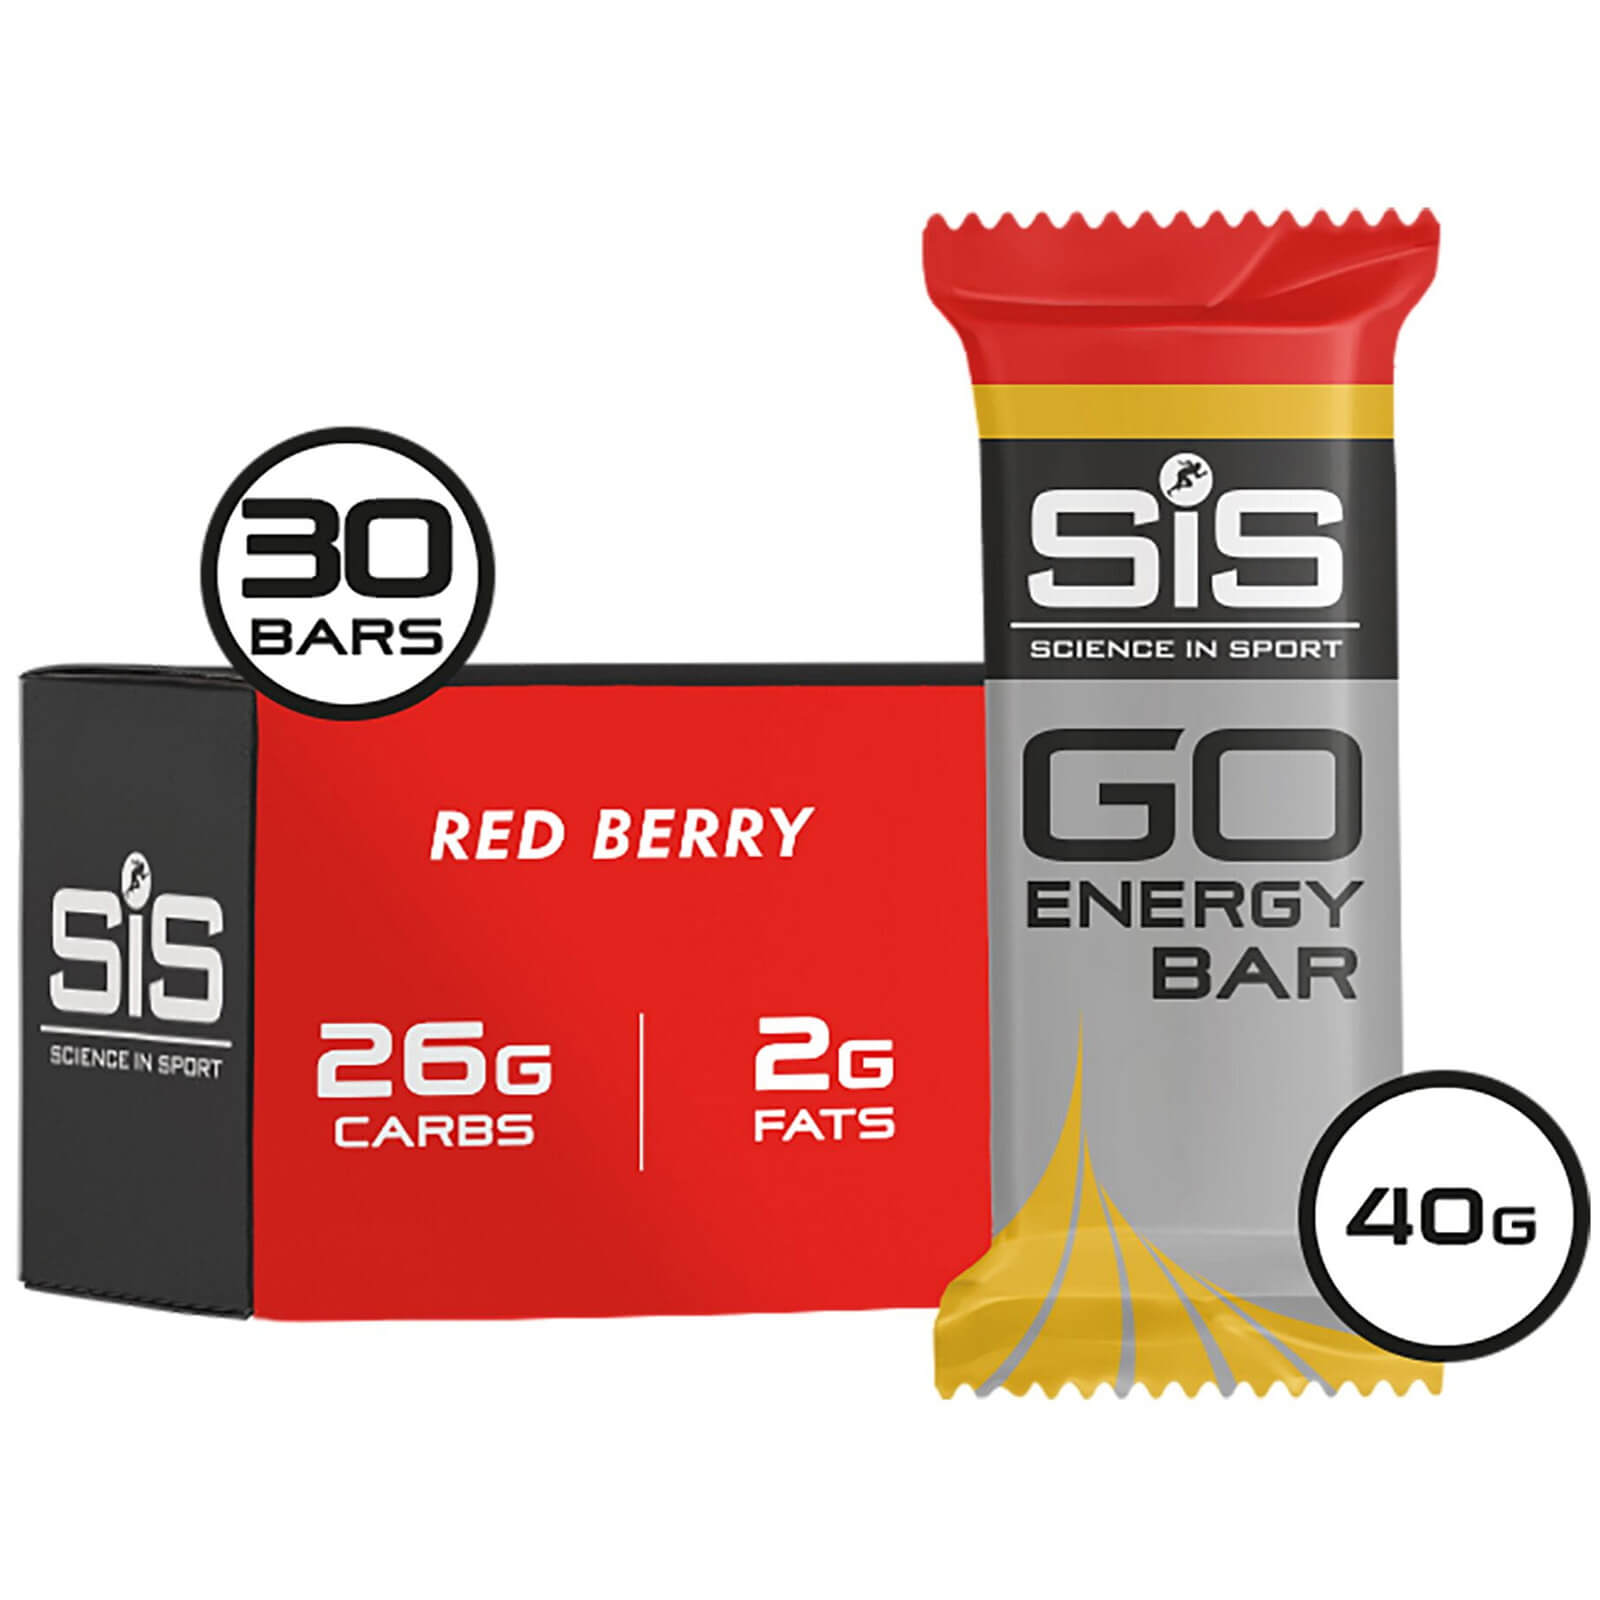 Science in Sport GO Mini Energy 40g Bar Box of 30 - Red Berry